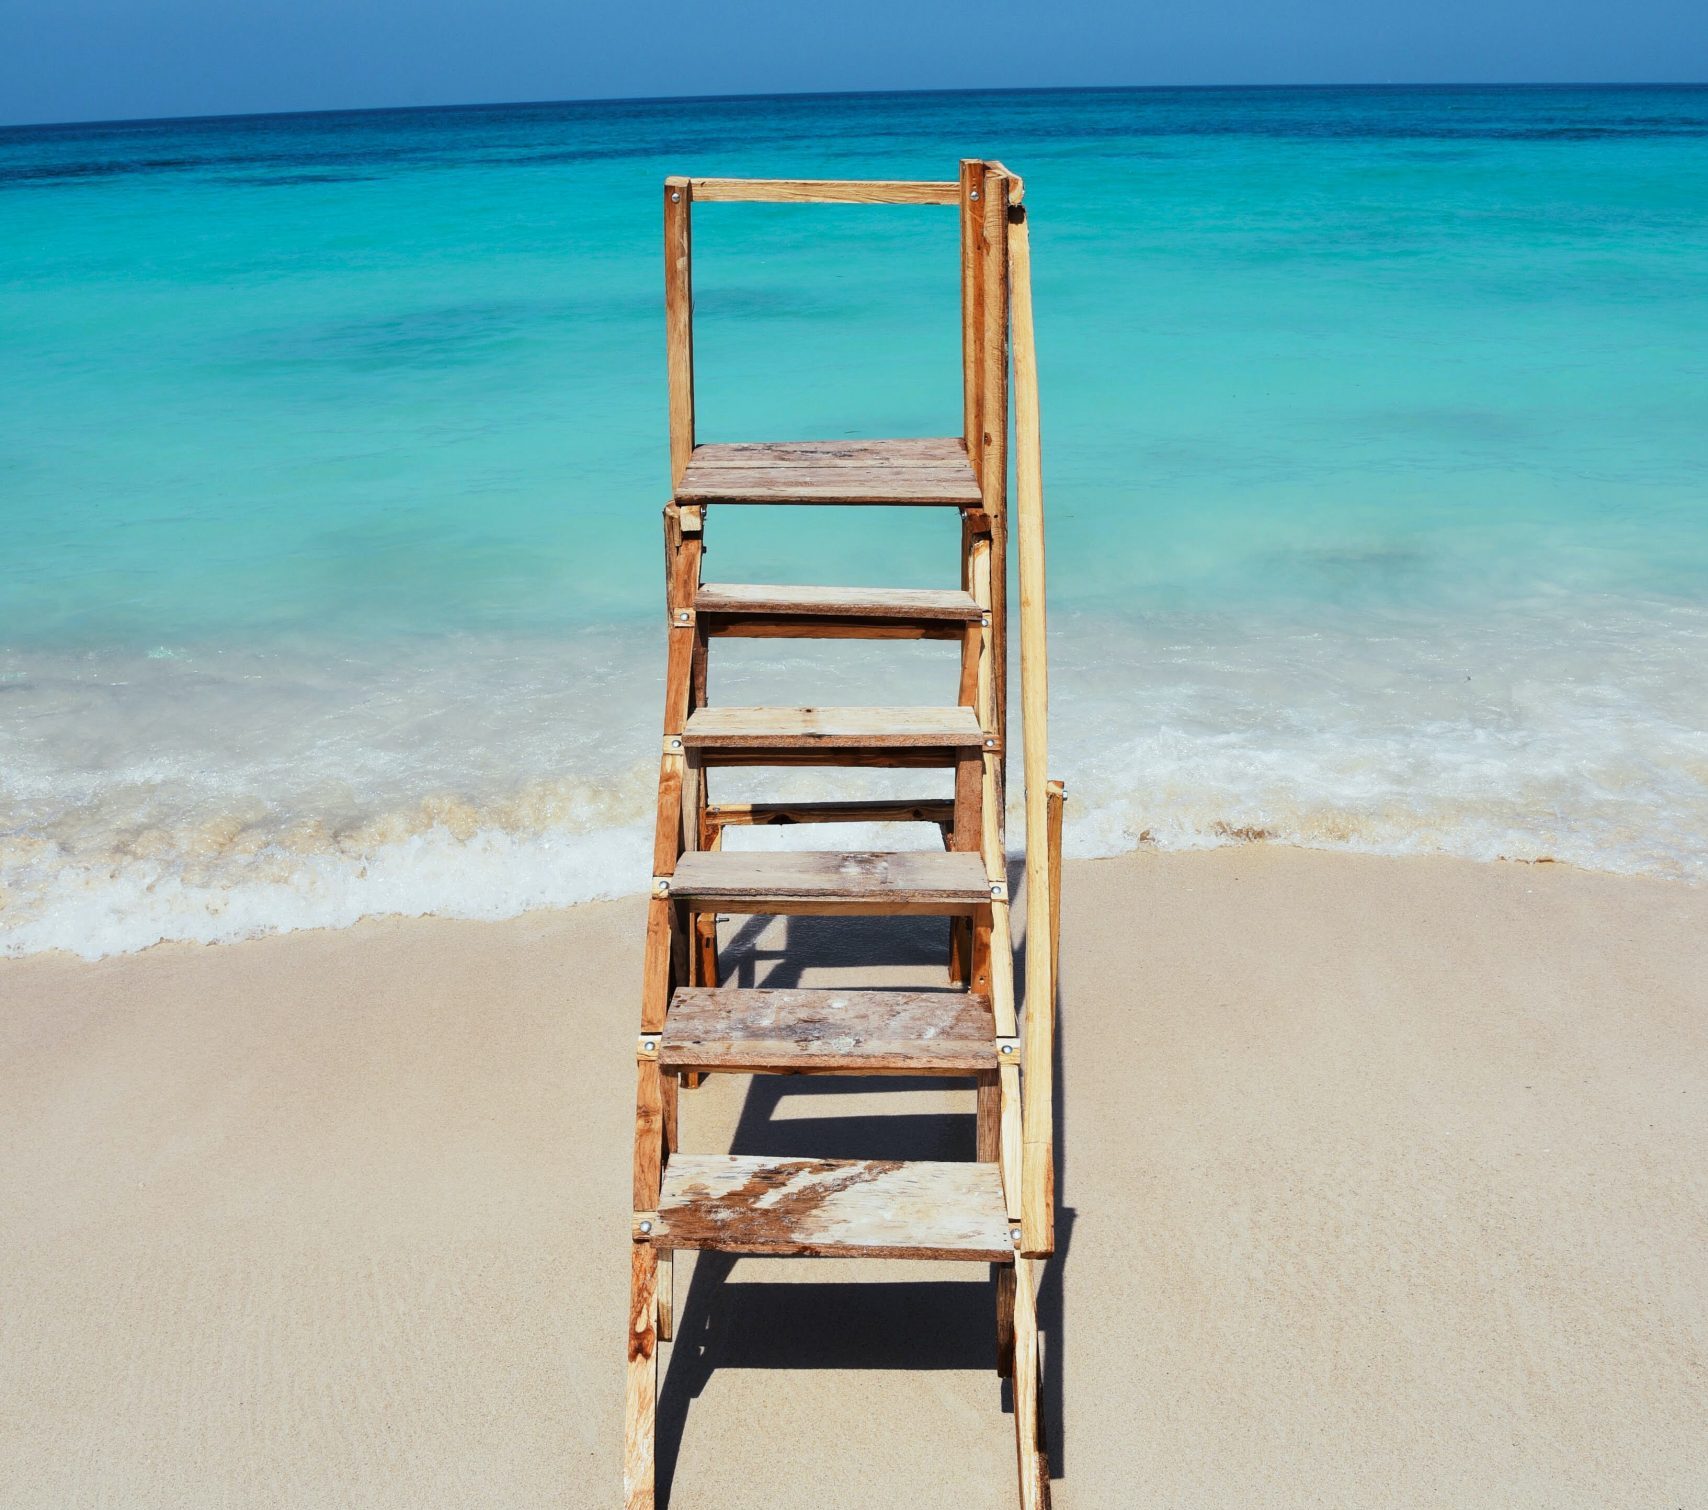 An old wooden stair ladder sits on a sandy beach right at the shore